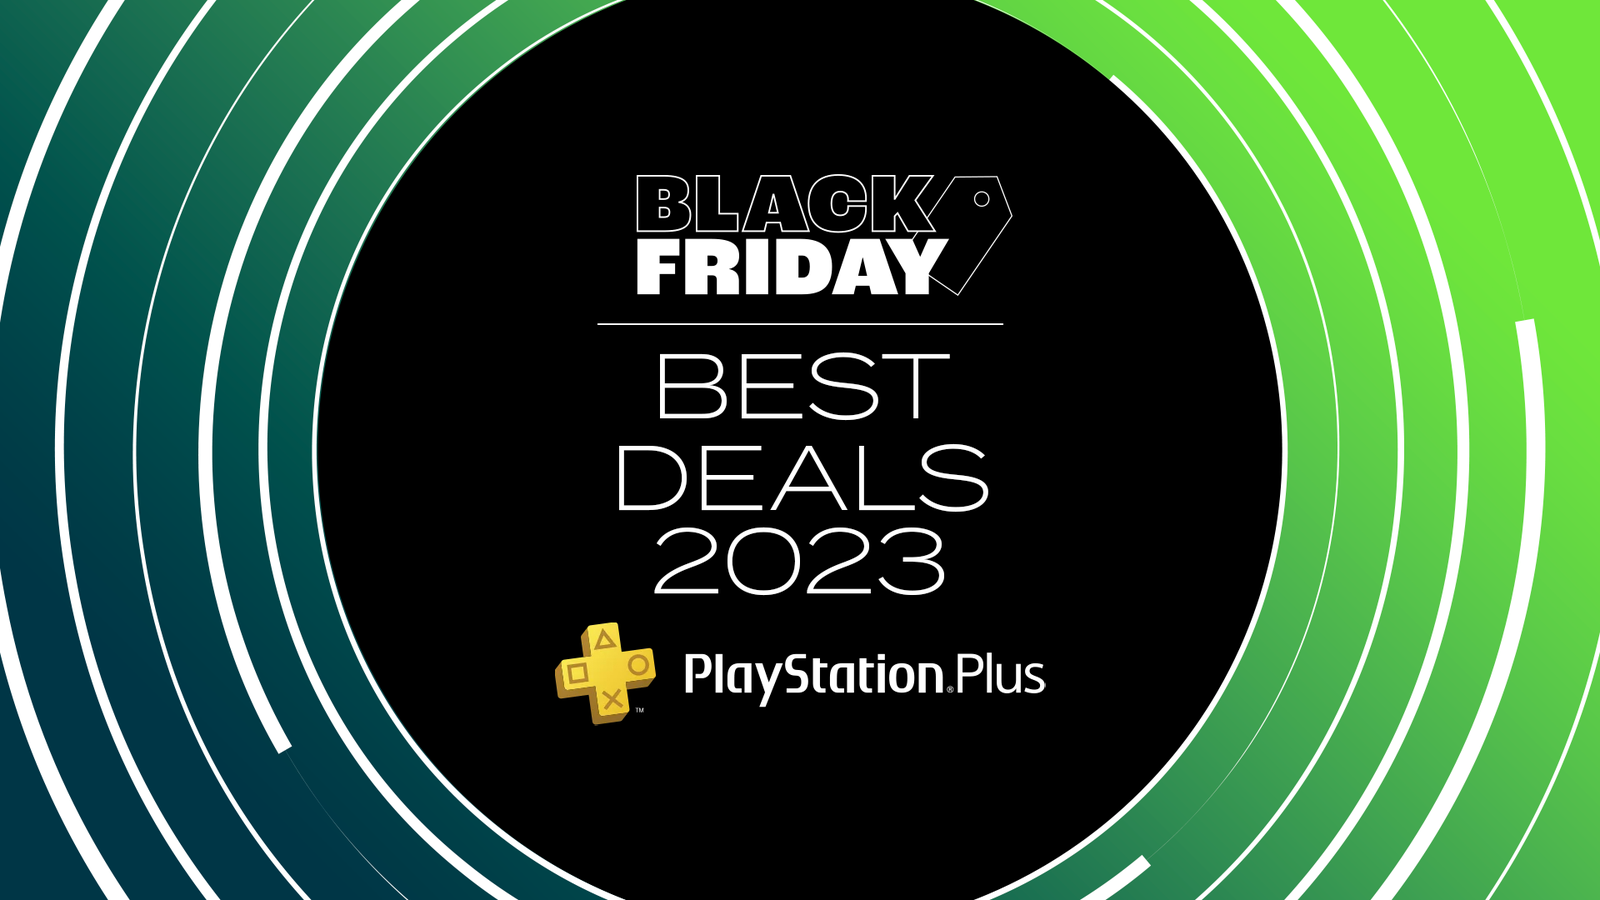 PlayStation Plus Premium Upgrades Are 30 Percent Off For Black Friday